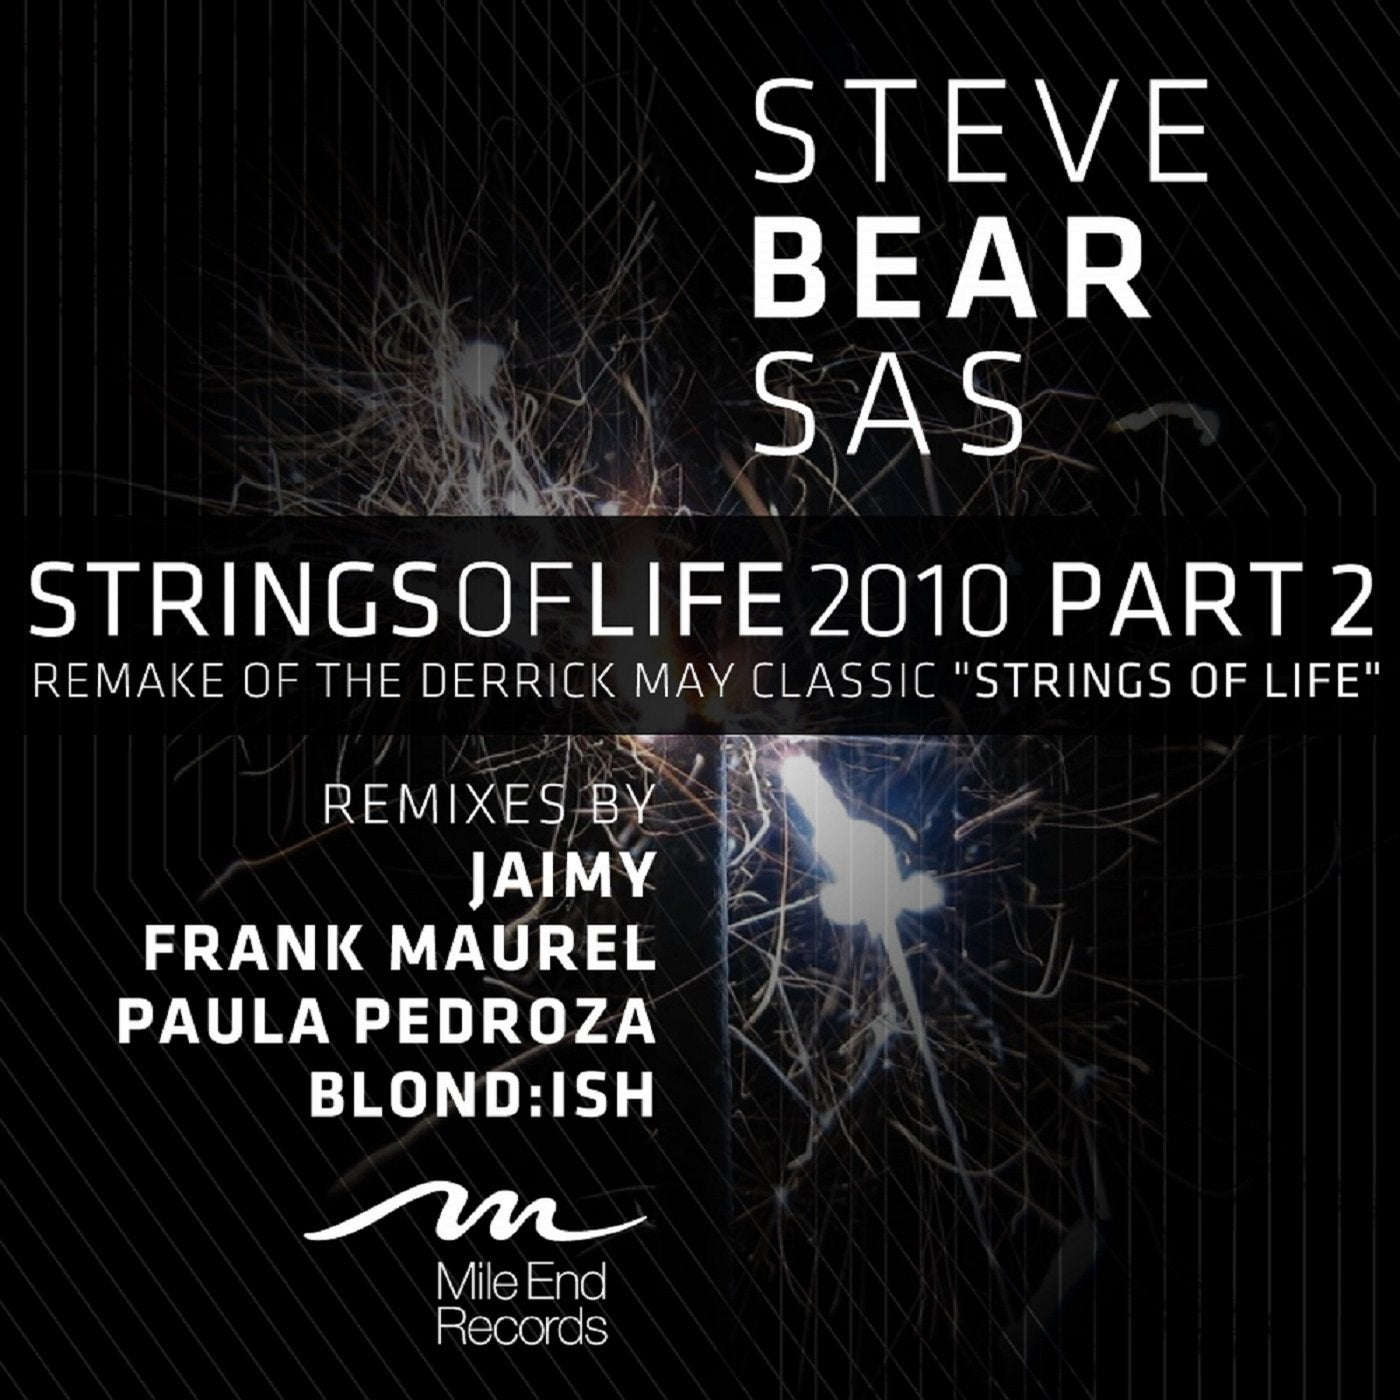 Strings Of Life 2010 Part 2